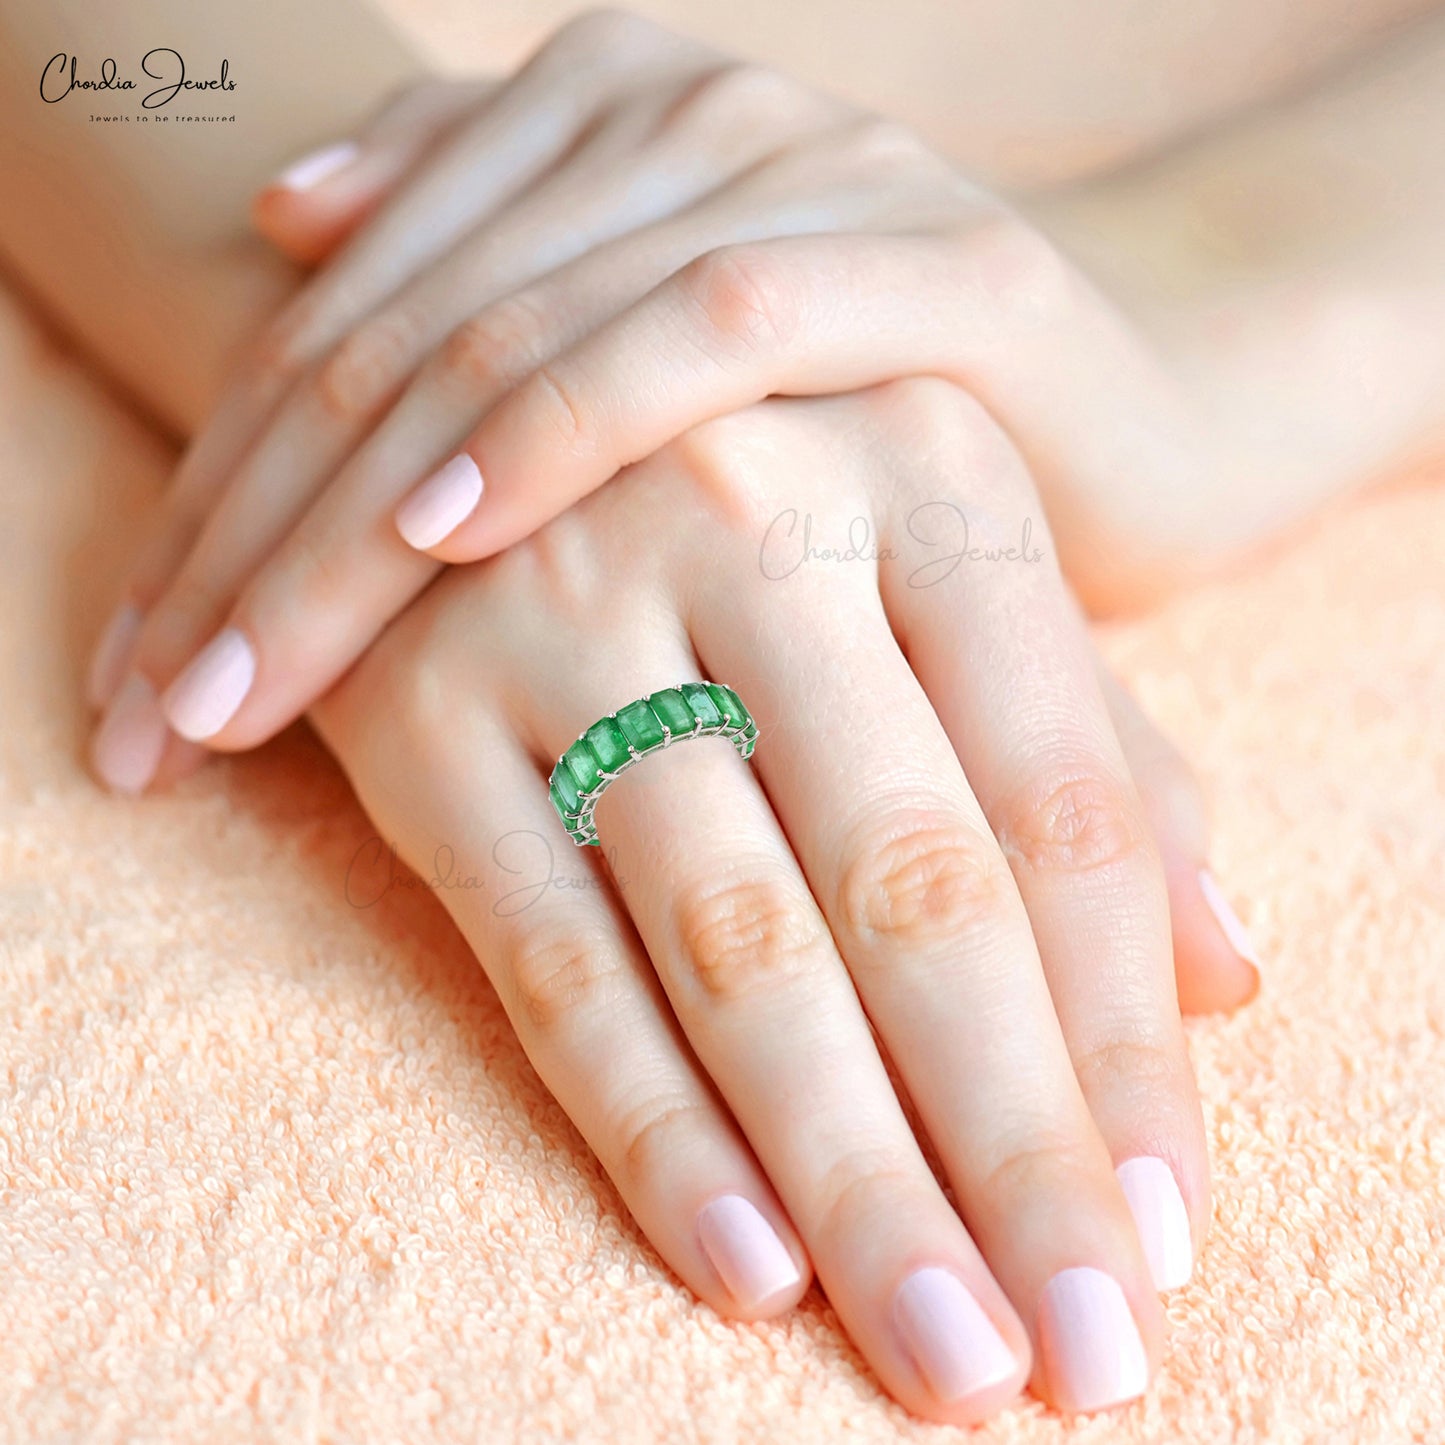 Genuine Emerald Eternity Ring 6x4mm Emerald Cut Gemstone Ring 14k Solid White Gold Ring For Engagement